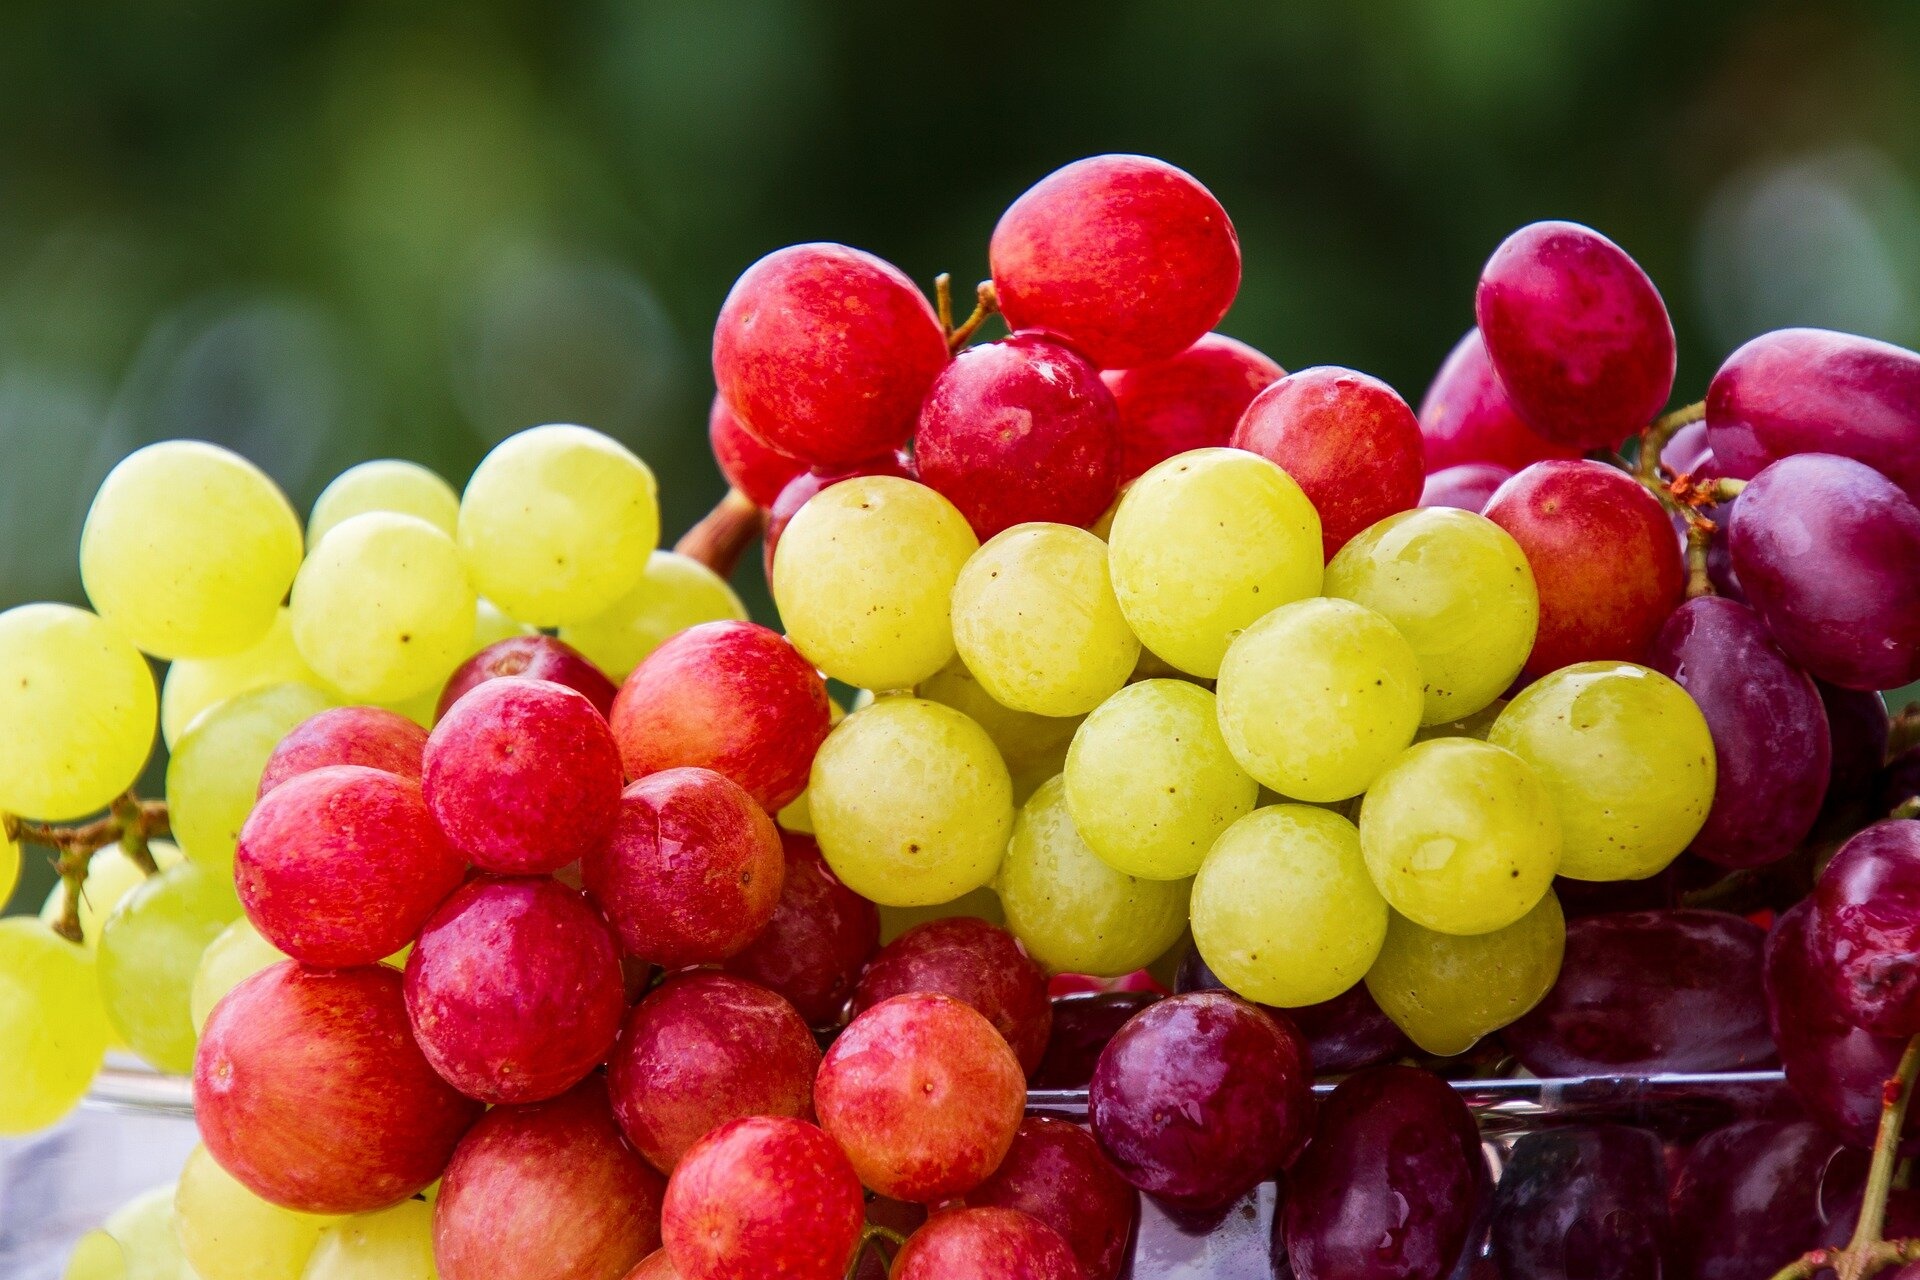 Grapes: Increase gut biome diversity and lower cholesterol. 1920x1280 HD Wallpaper.